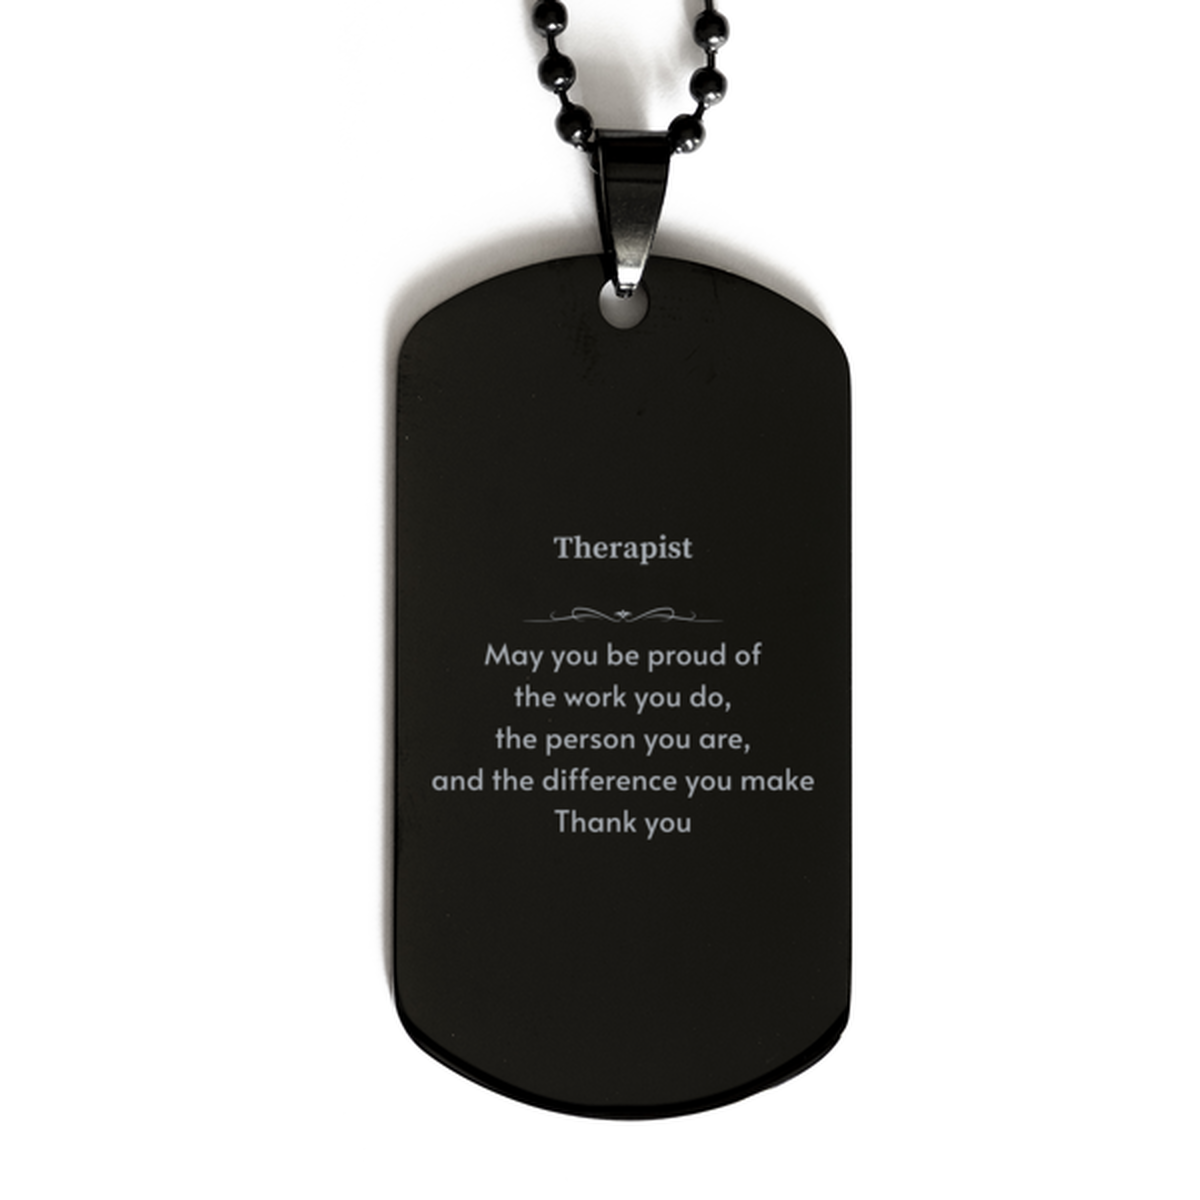 Heartwarming Black Dog Tag Retirement Coworkers Gifts for Therapist, Therapist May You be proud of the work you do, the person you are Gifts for Boss Men Women Friends